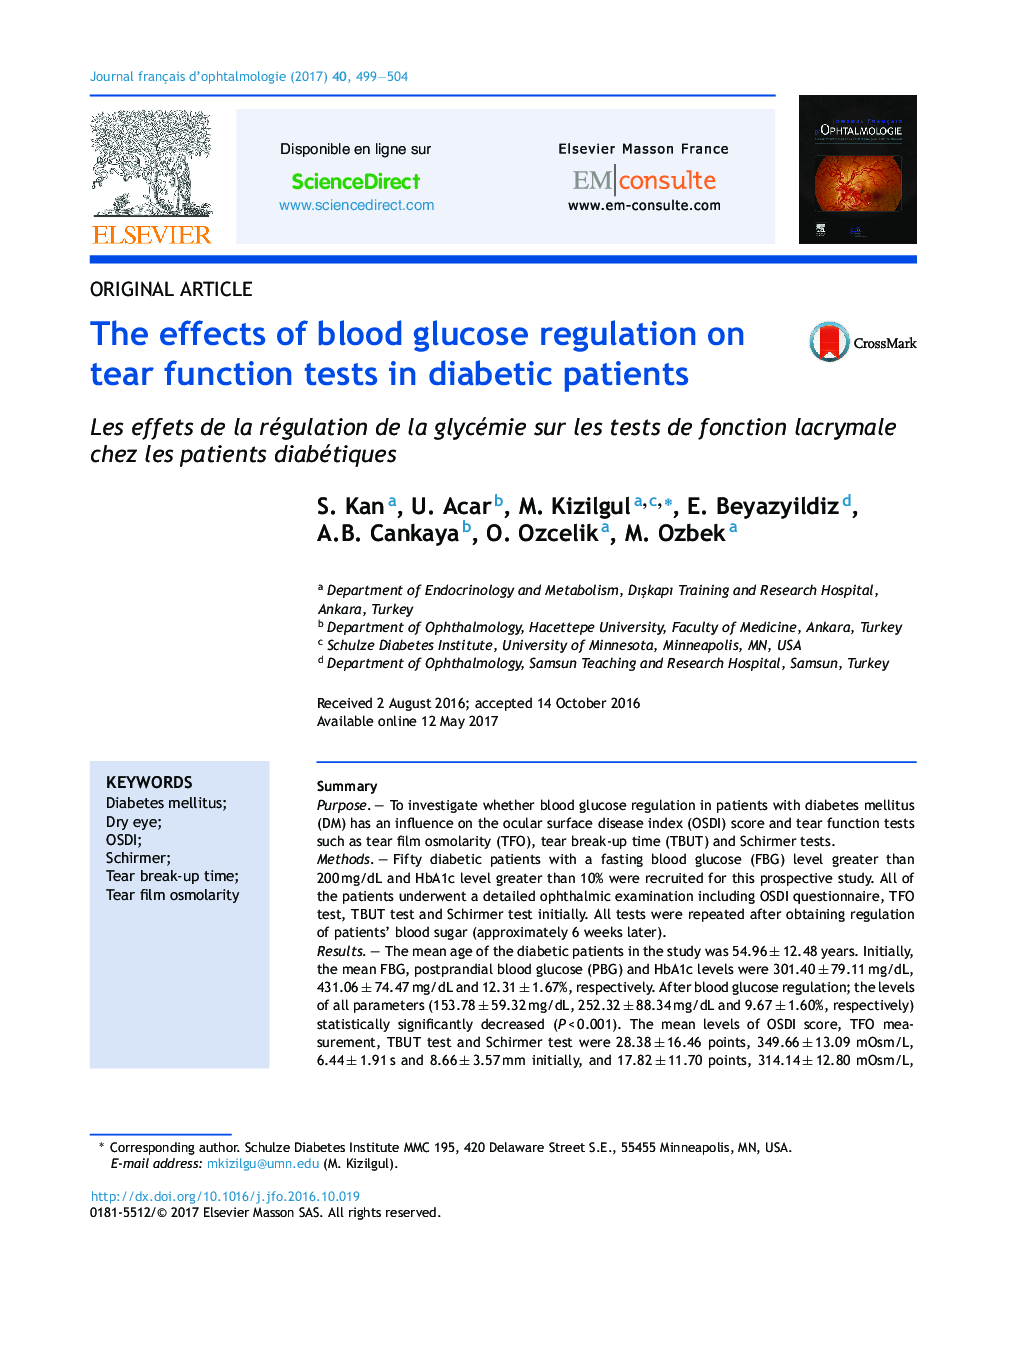 The effects of blood glucose regulation on tear function tests in diabetic patients